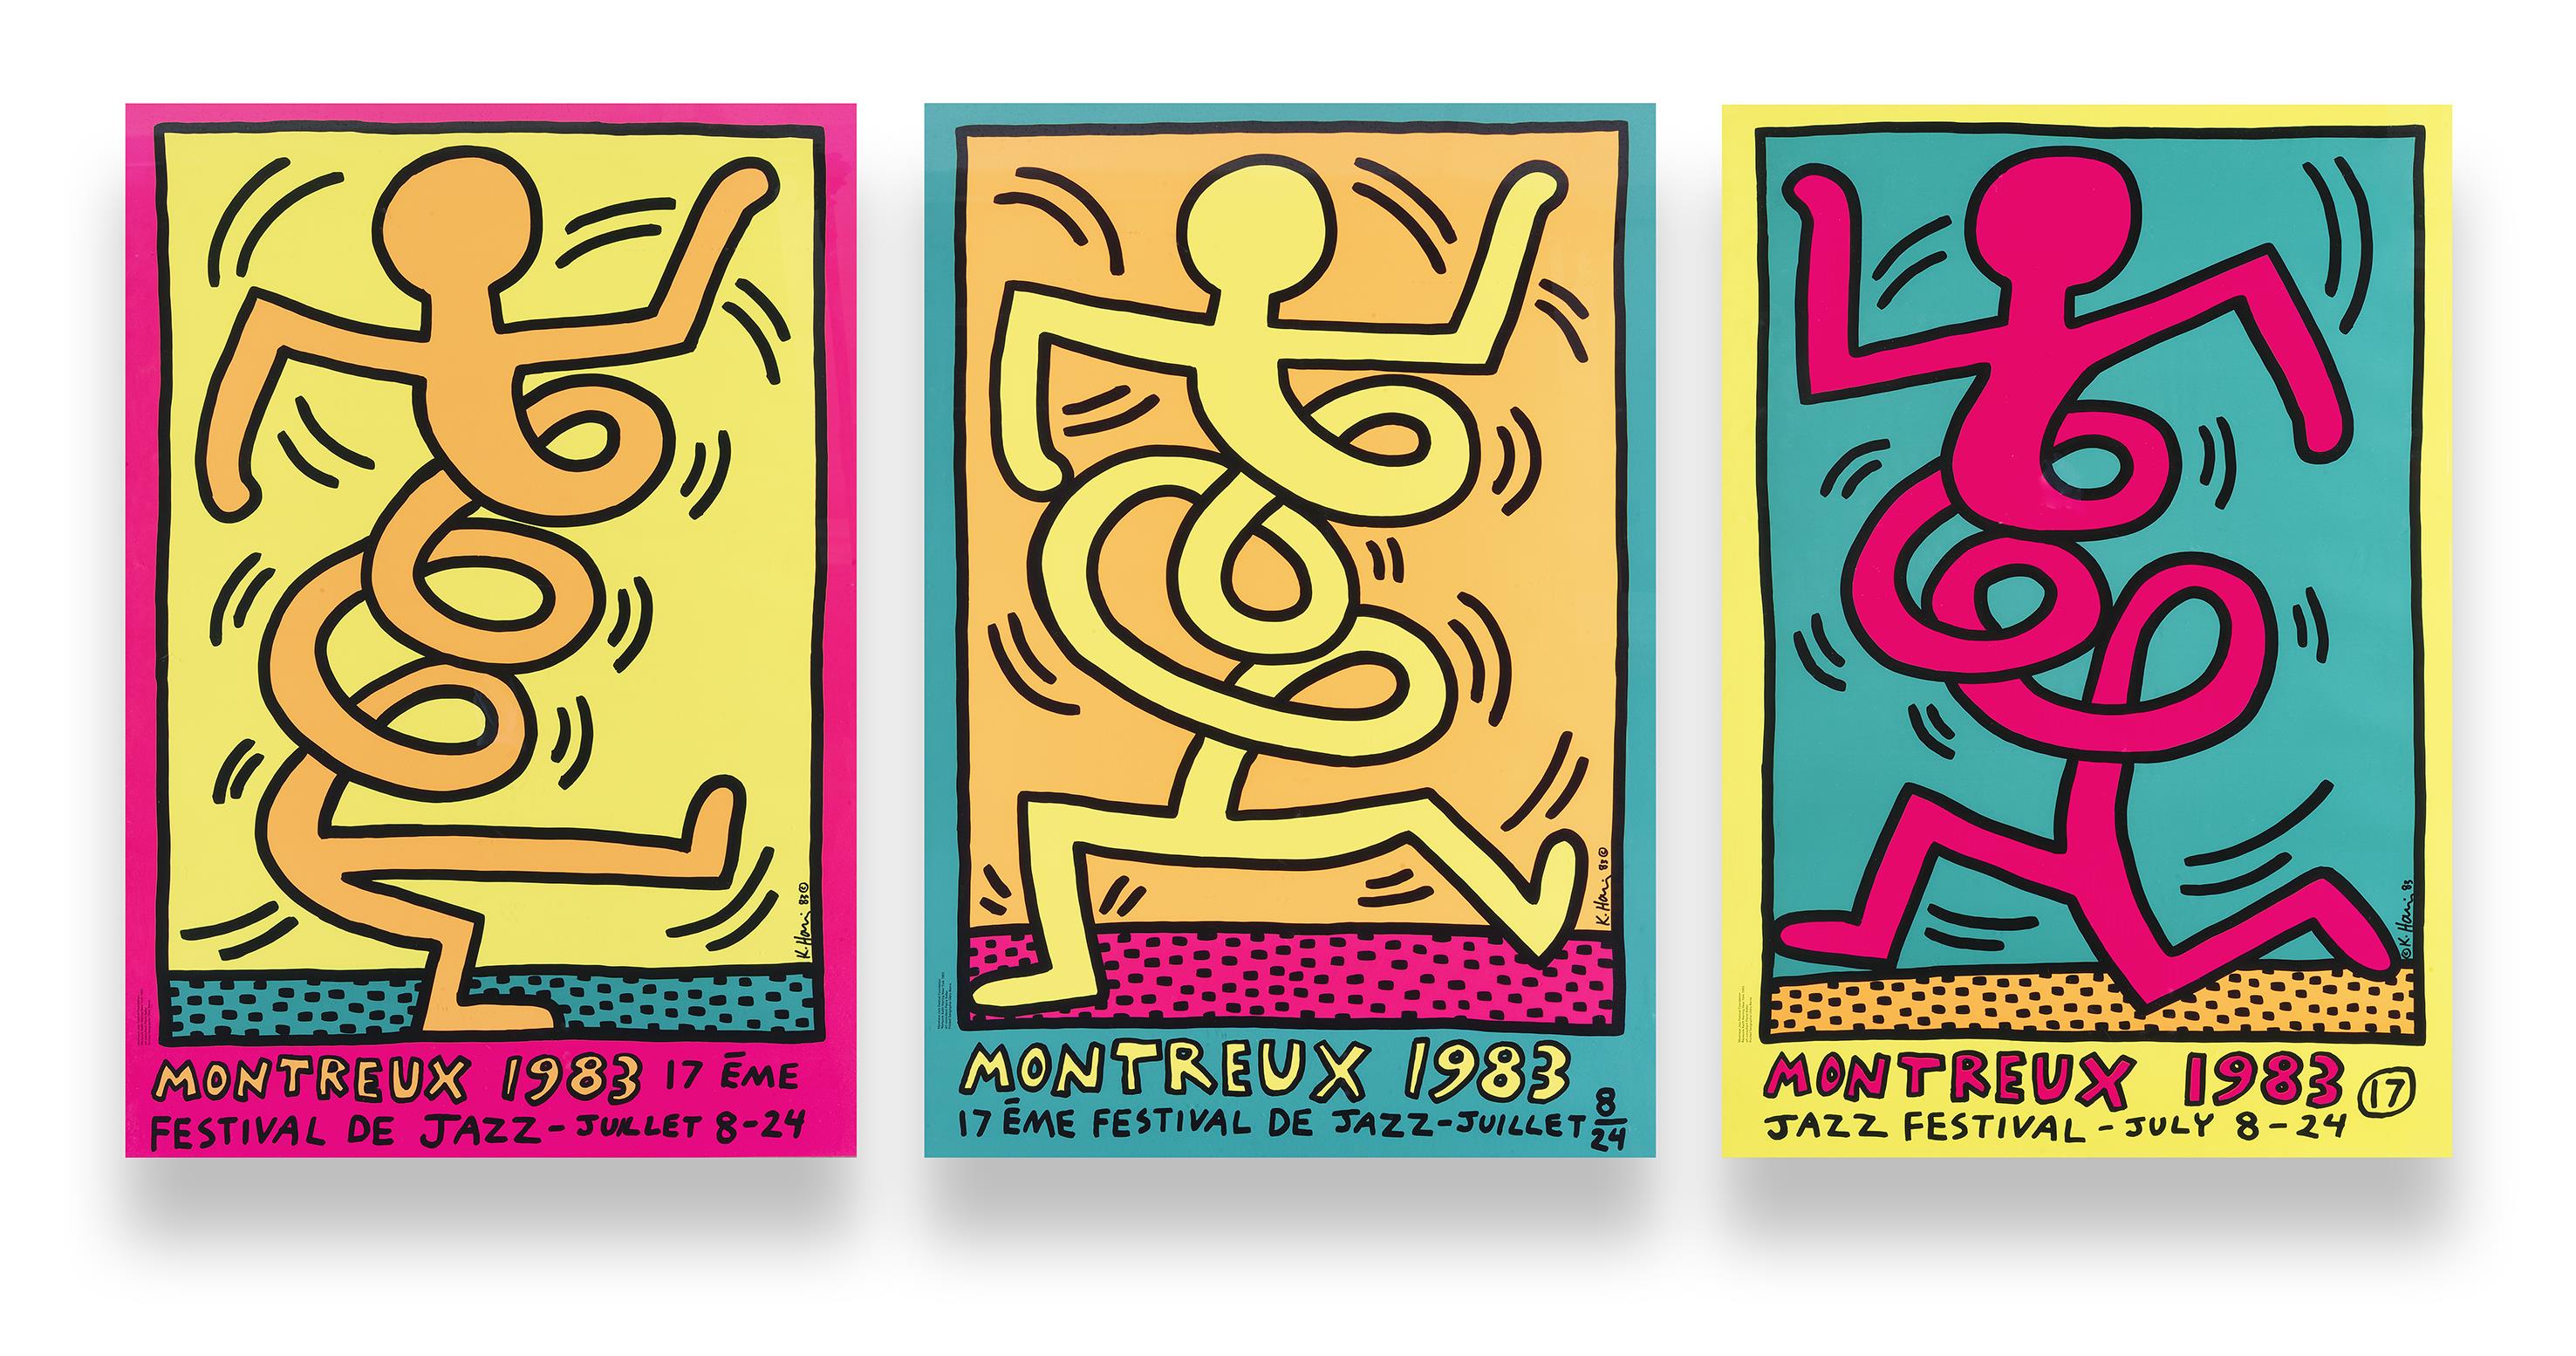 Keith Haring (American 1958-1990), 'Montreux Jazz De Festival (Green, Pink & Yellow)', 1983